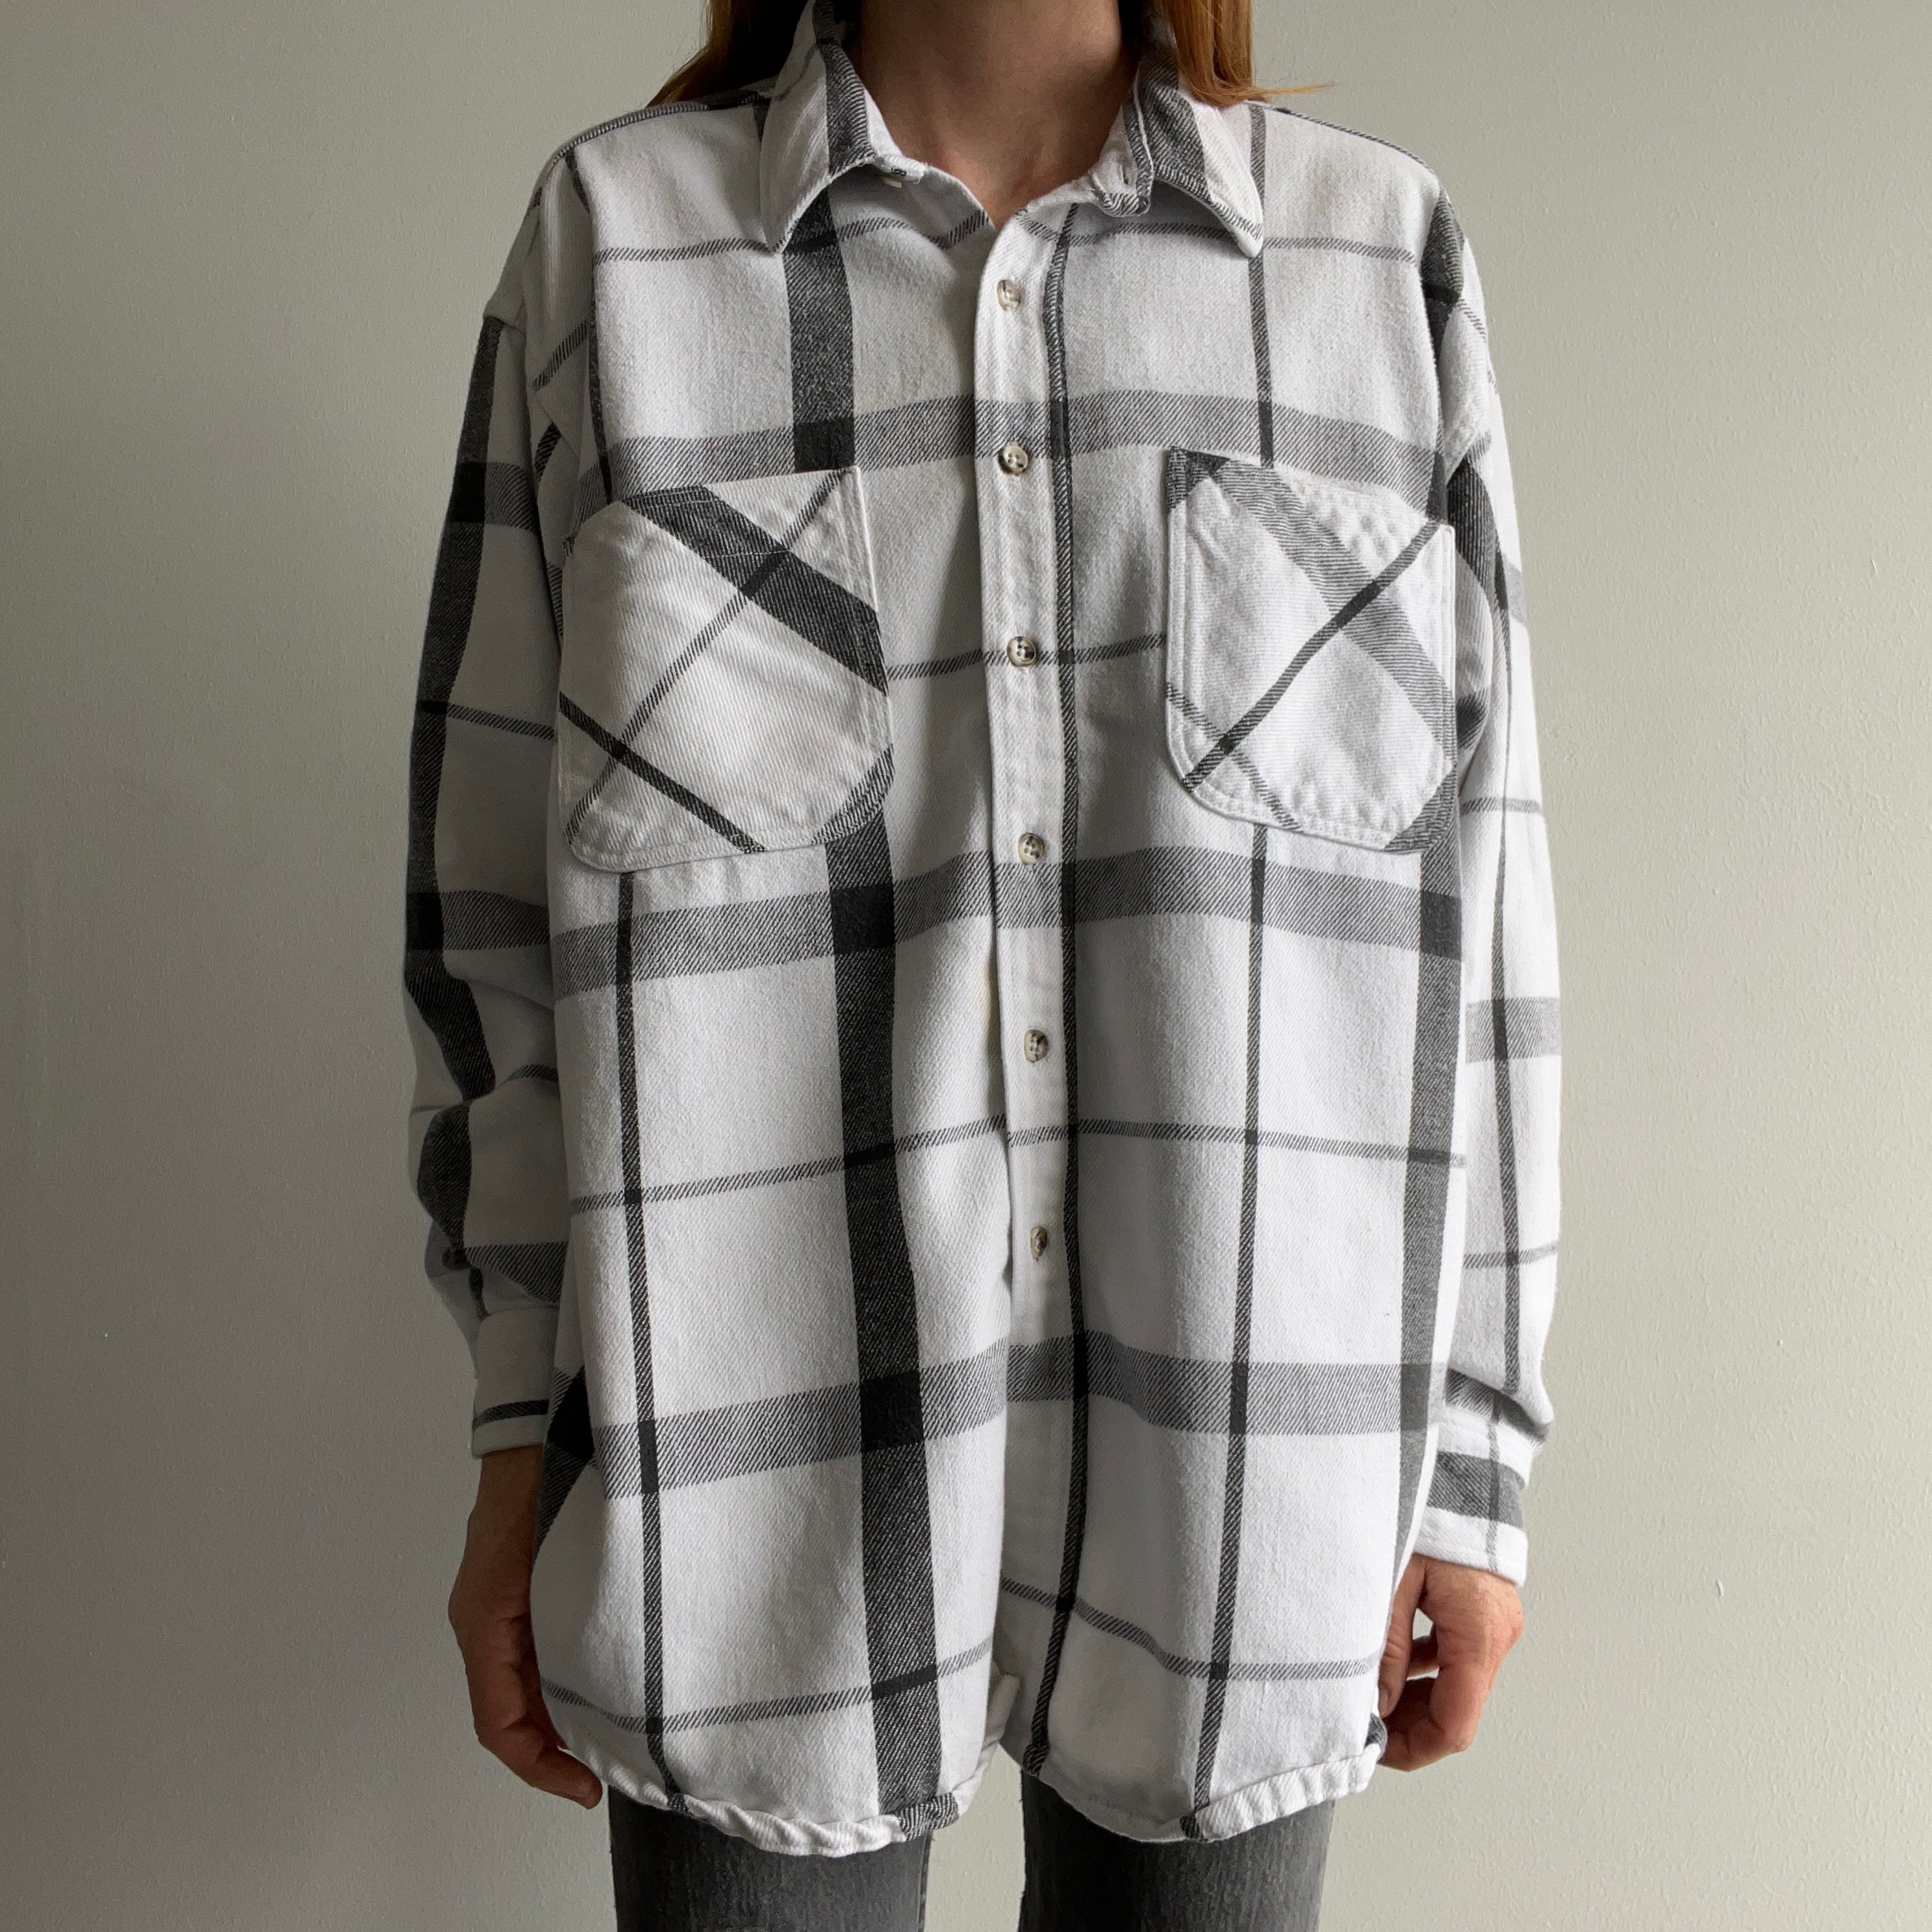 1990s St. John's Bay Black and White Cotton Flannel